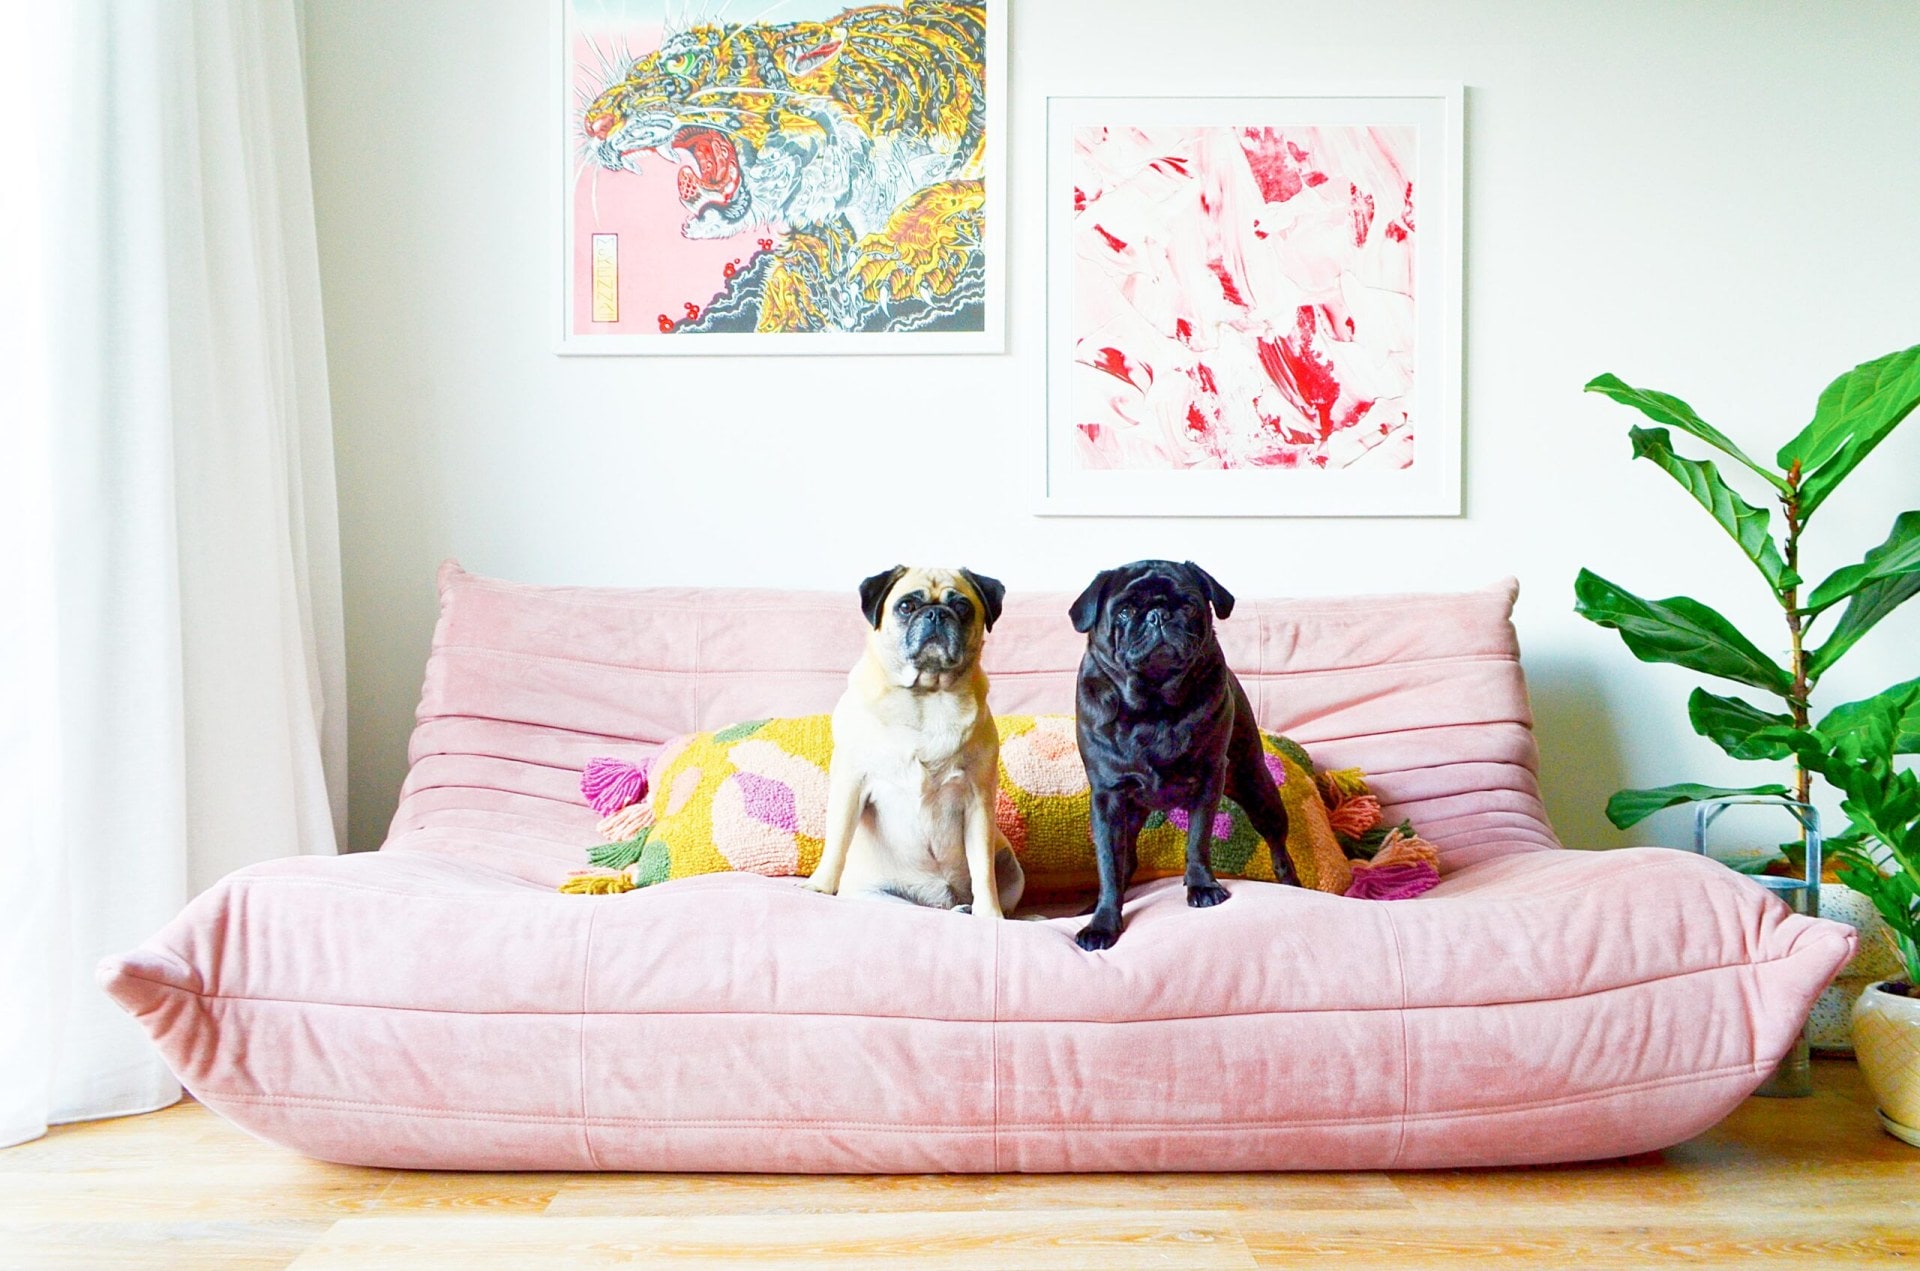 Two pugs sitting on a pink couch with cushions next to an indoor plant.